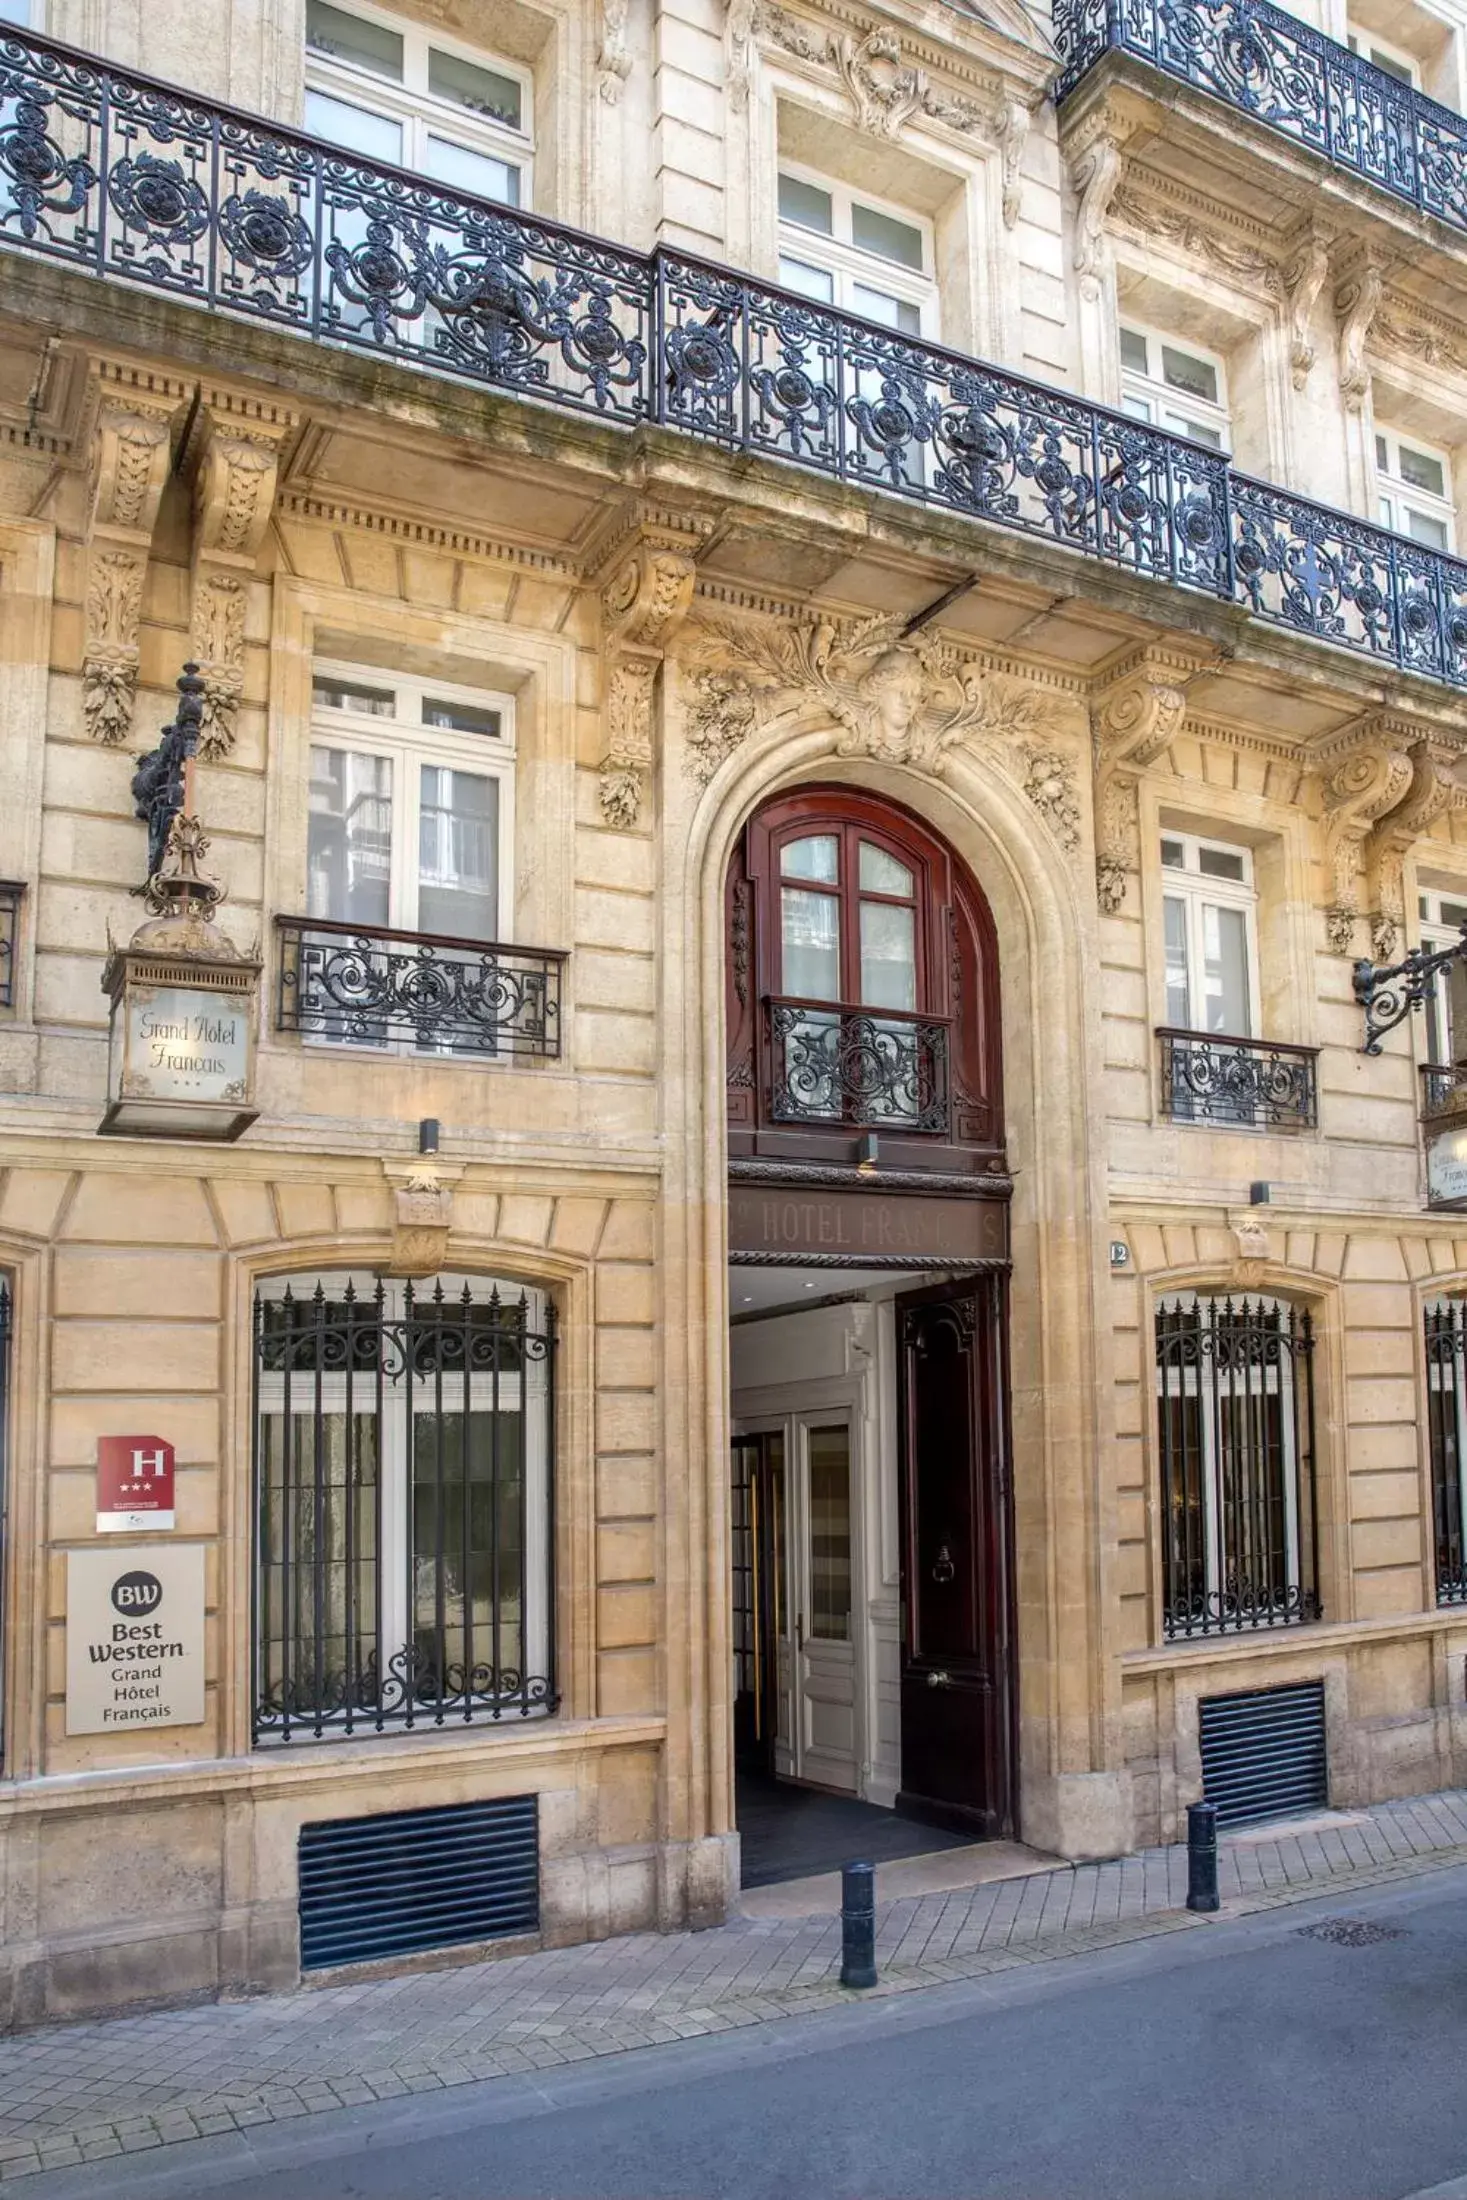 Property Building in Best Western Grand Hotel Francais